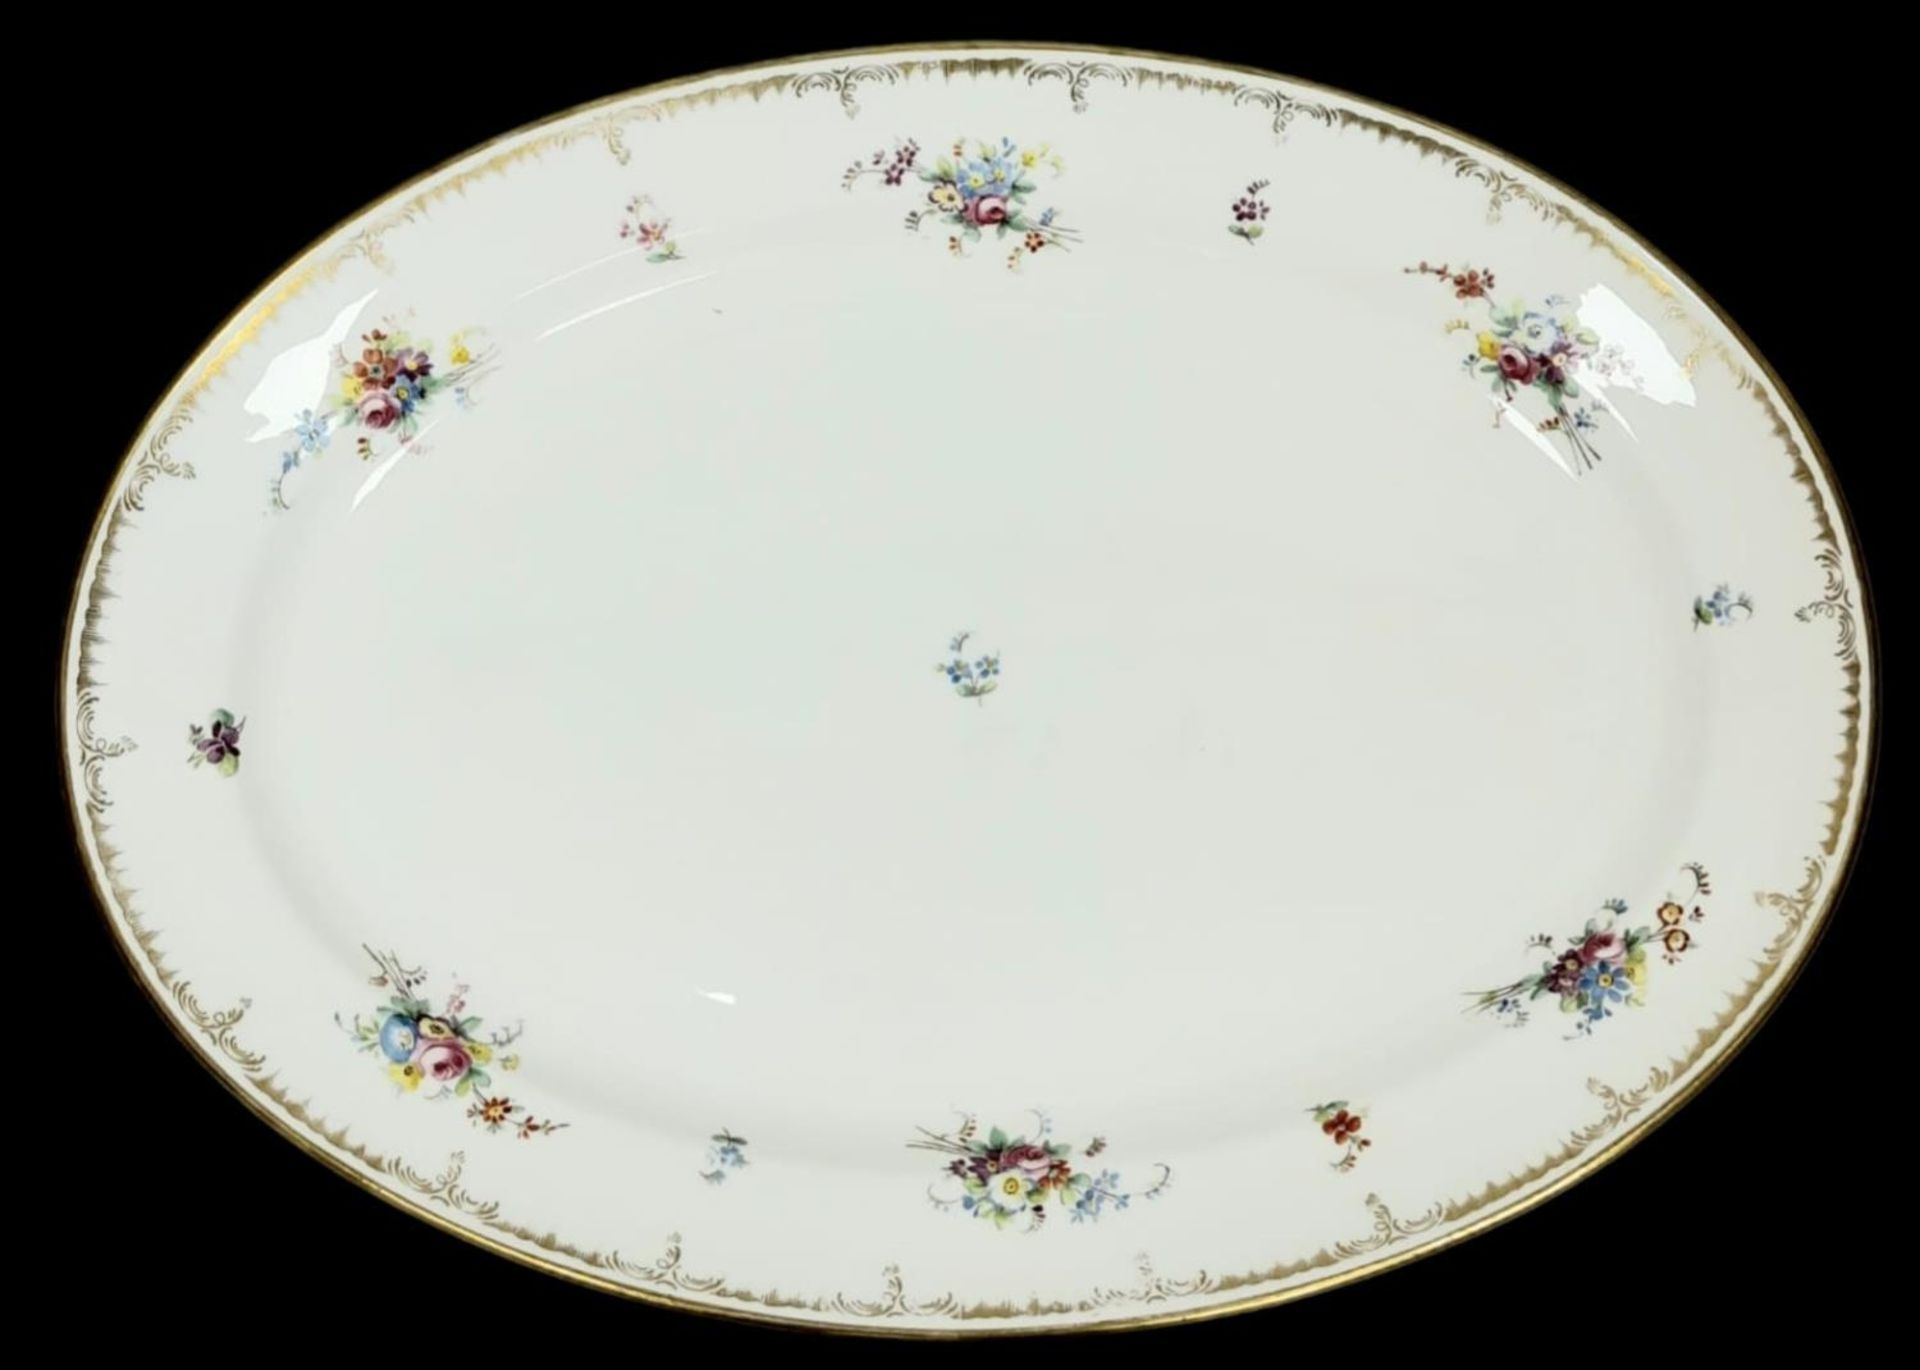 An Antique Victorian Minton Large Serving Plate. Beautifully decorated with floral displays and